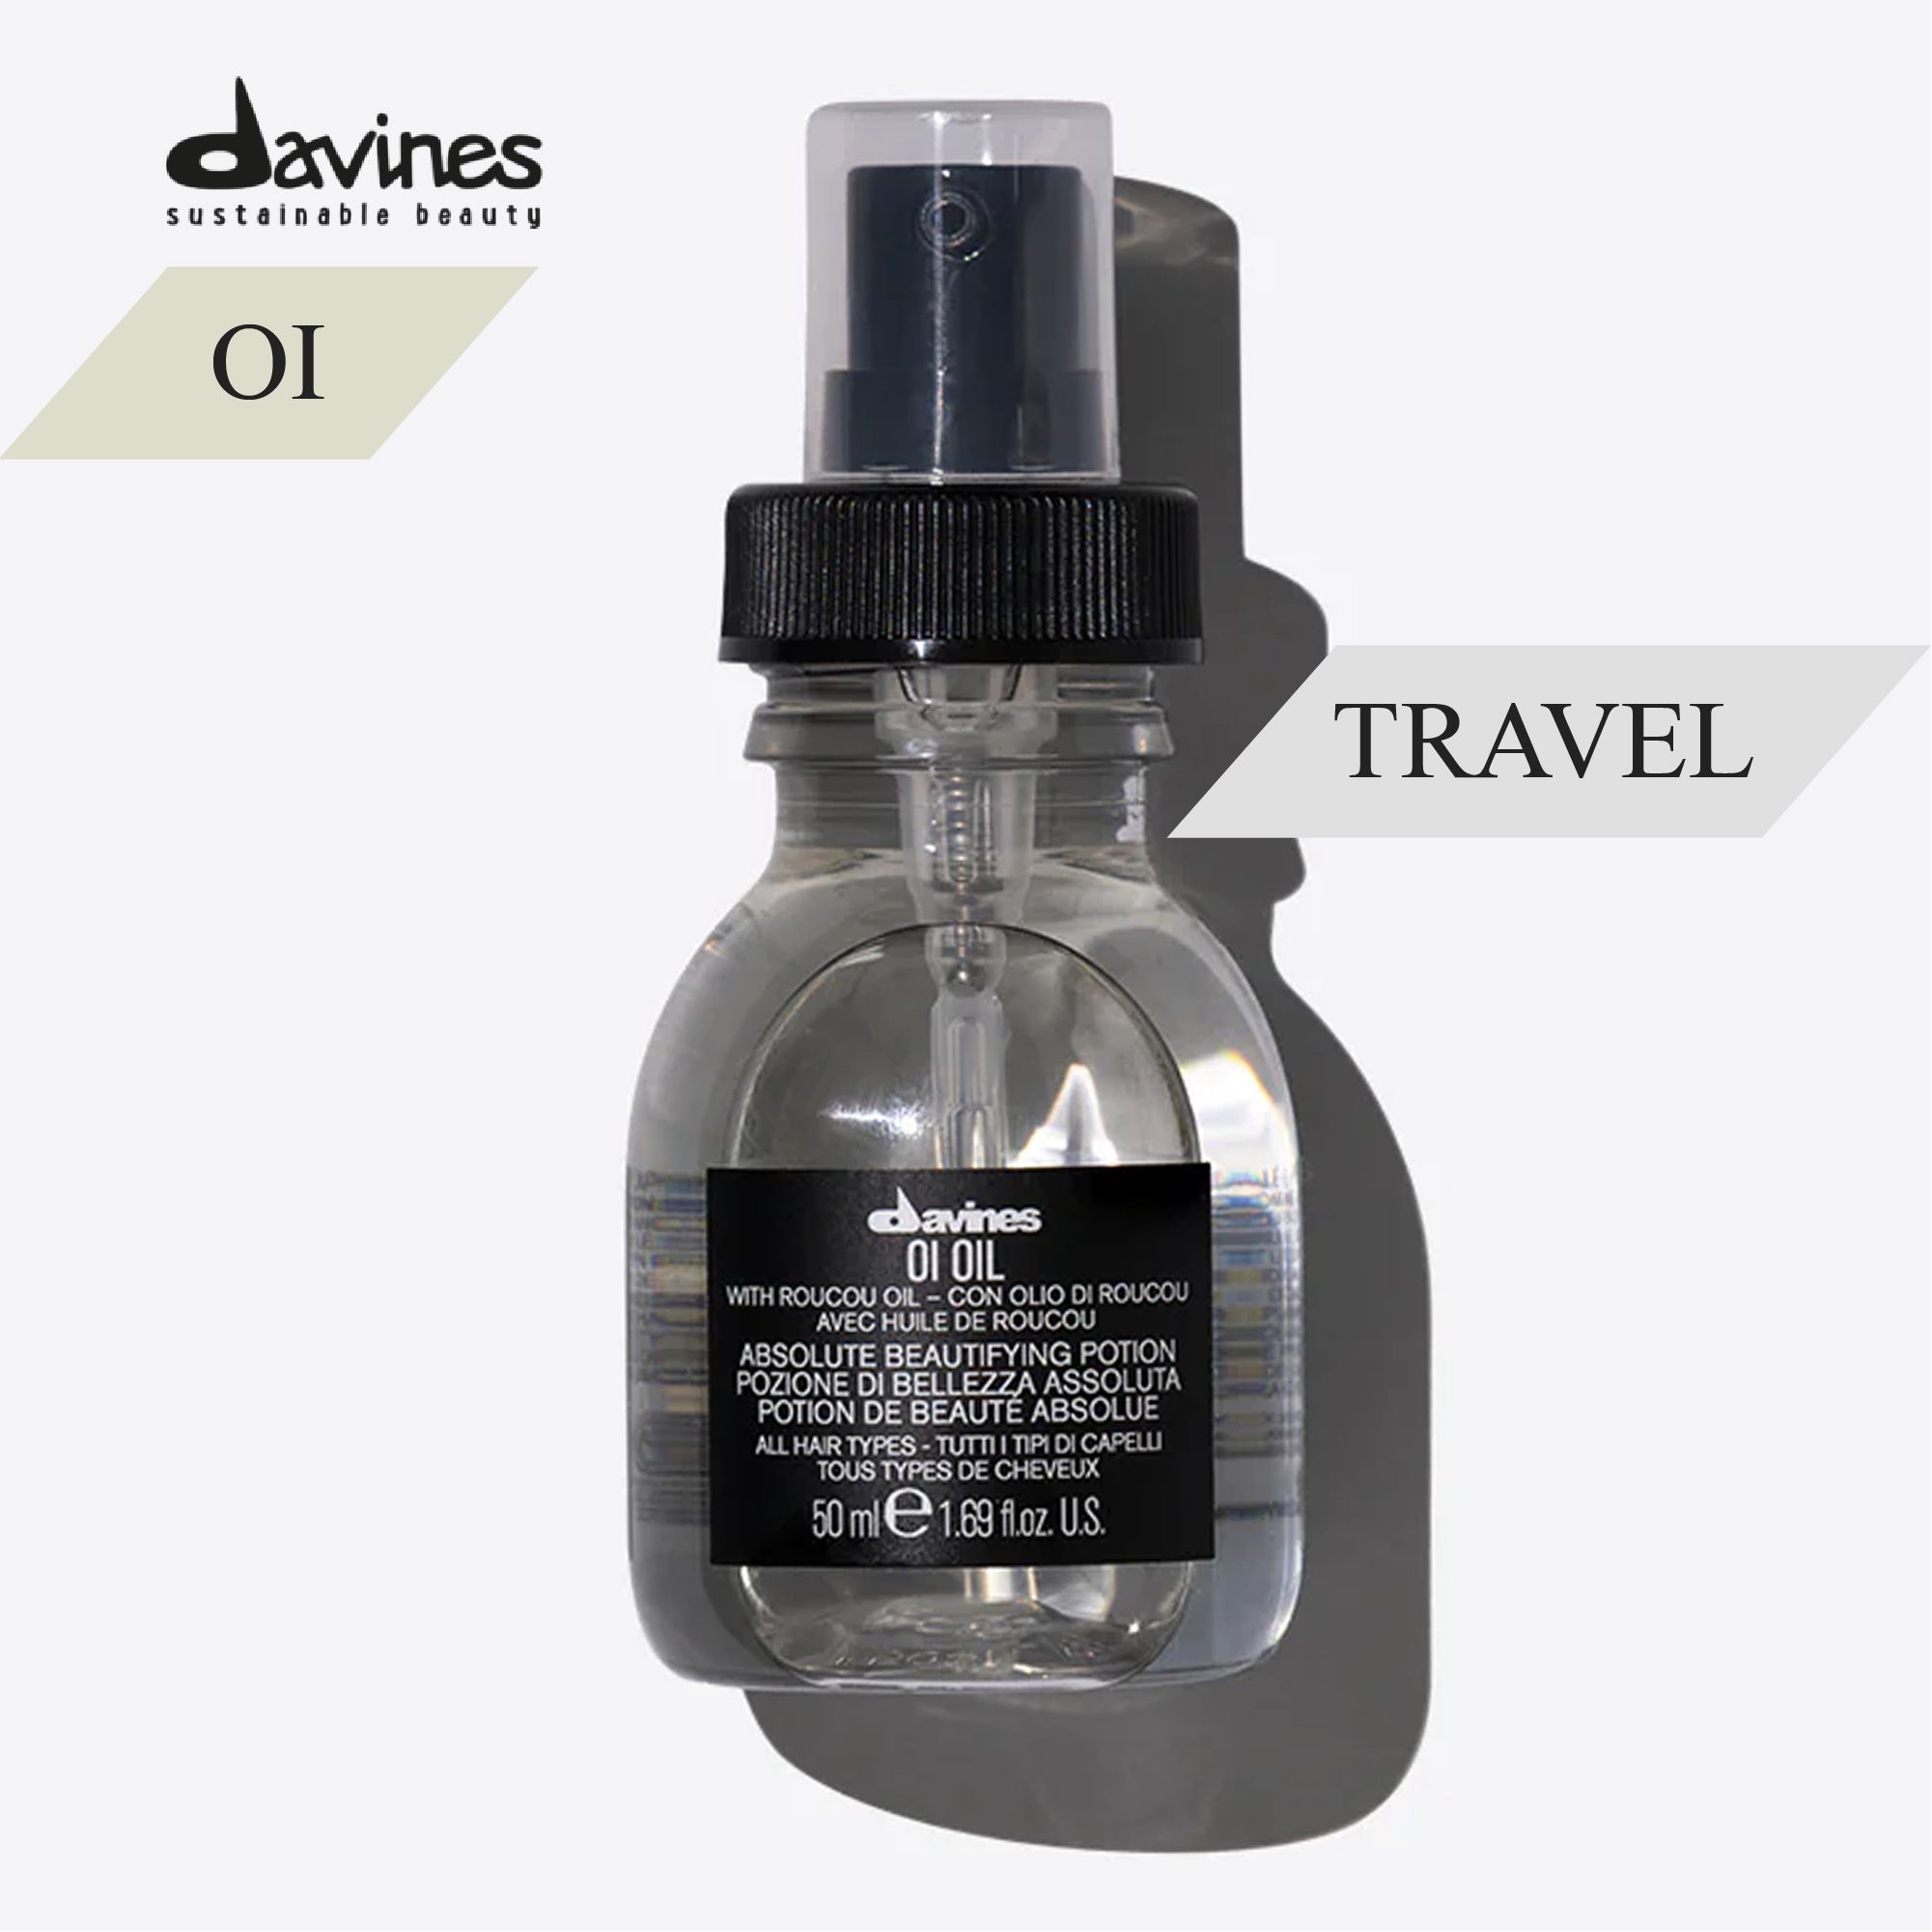 Davines oi absolute beautifying. Oi/Oil, absolute Beautifying Potion- масло для абсолютной красоты волос 50мл. Oi Oil Davines масло. Davines масло для абсолютной красоты волос oi Oil, absolute Beautifying Potion, 50мл. Масло Davines Oil "absolute Beautifying Potion" для абсолютной красоты волос 50 мл.